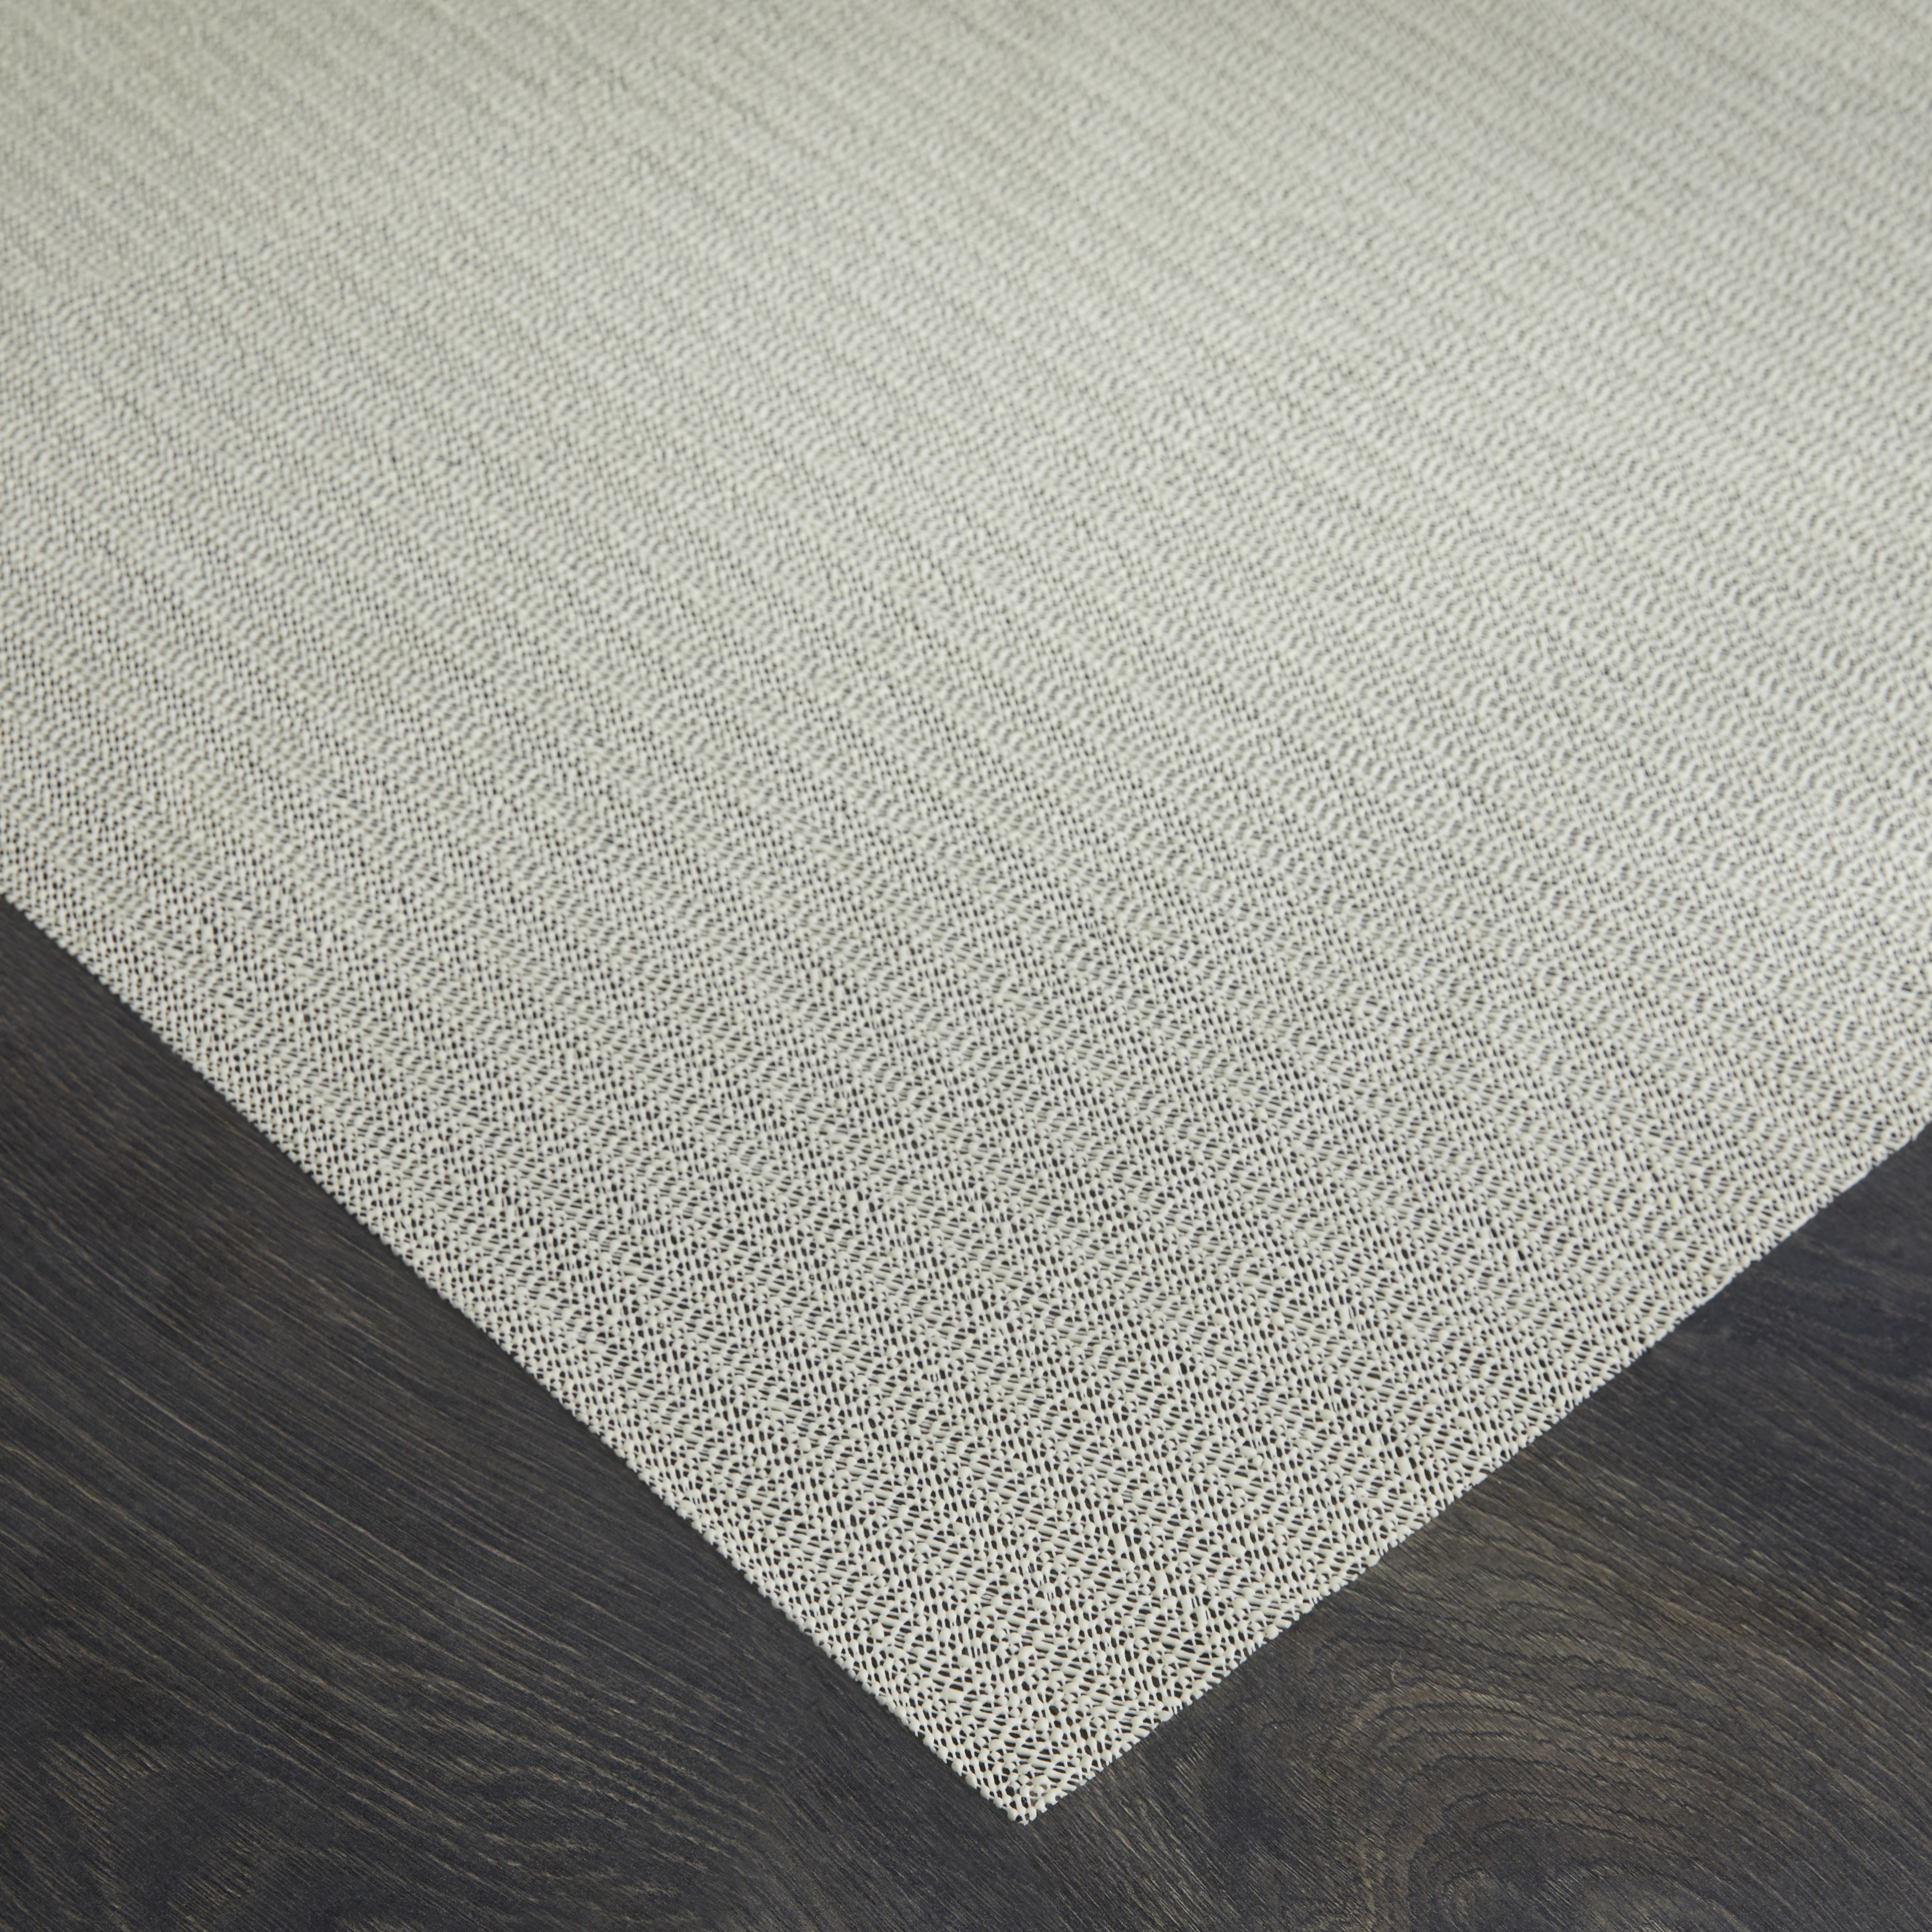 https://ak1.ostkcdn.com/images/products/4486376/Safavieh-Flat-Non-slip-Rug-Pad-Off-White-efed08d1-bf47-4bc1-9c7a-91f9a1d52536.jpg